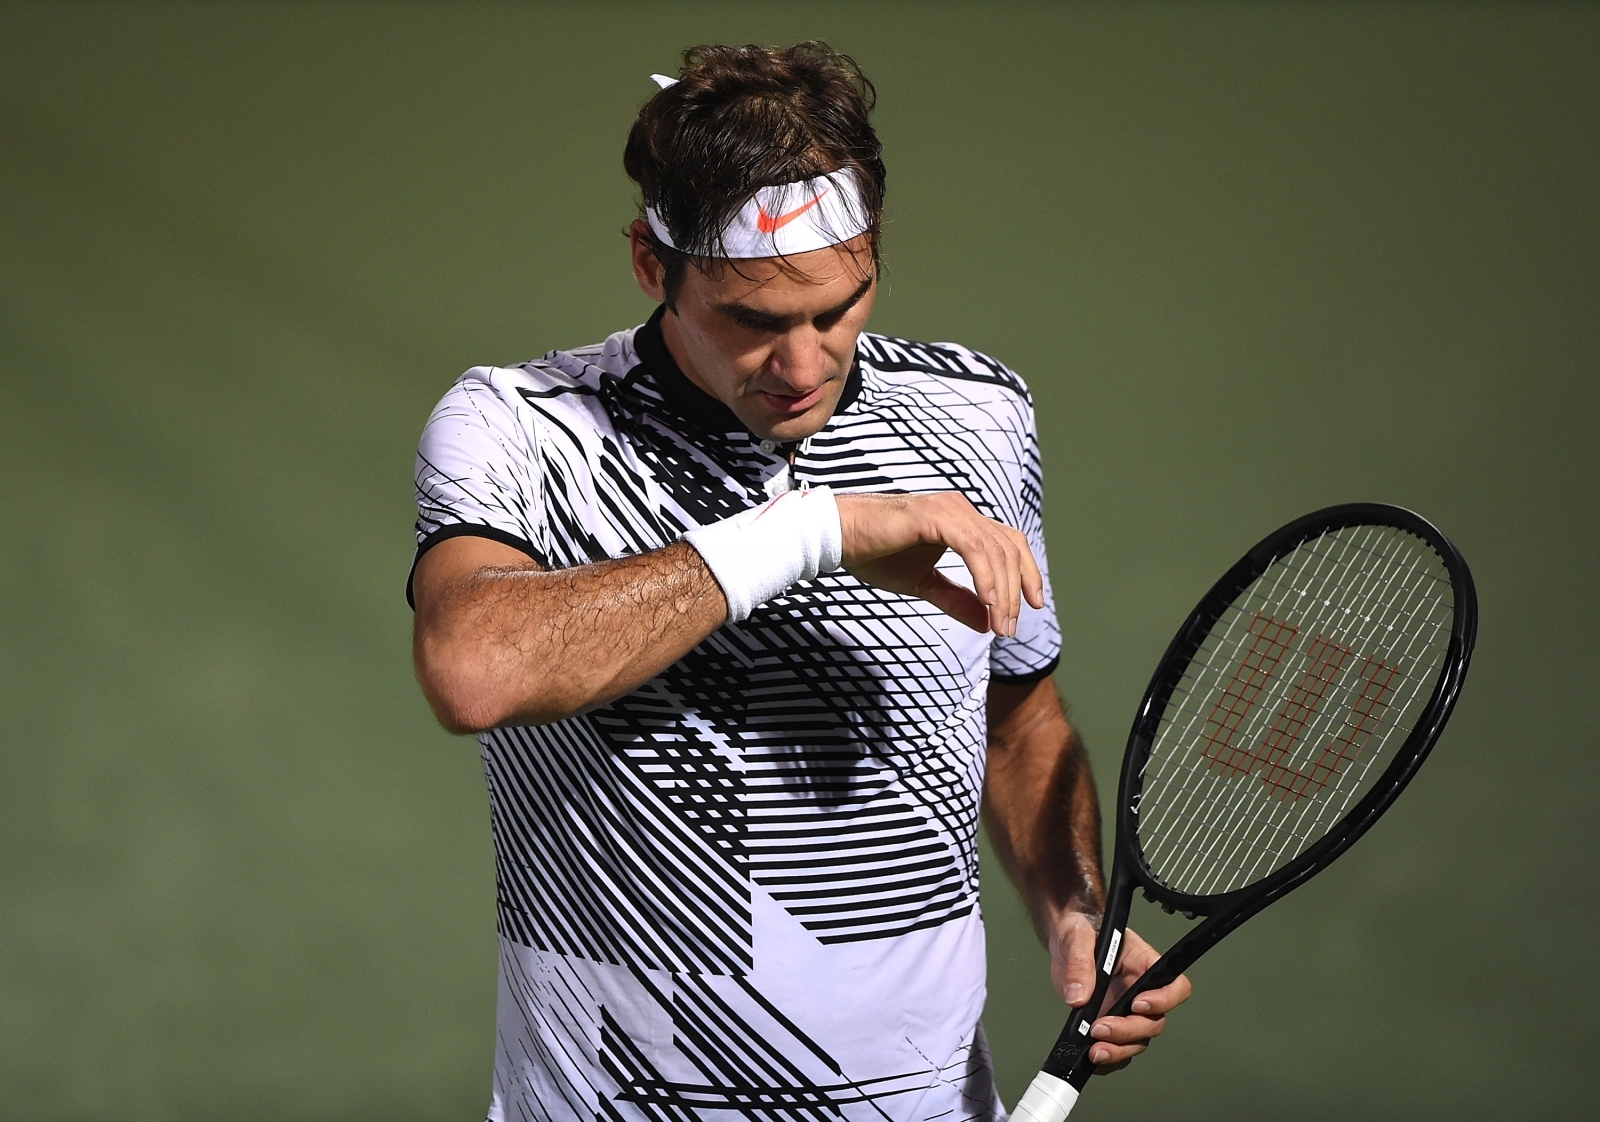 Roger Federer decision over participation in Dubai finally confirmed, next tournament too1600 x 1122